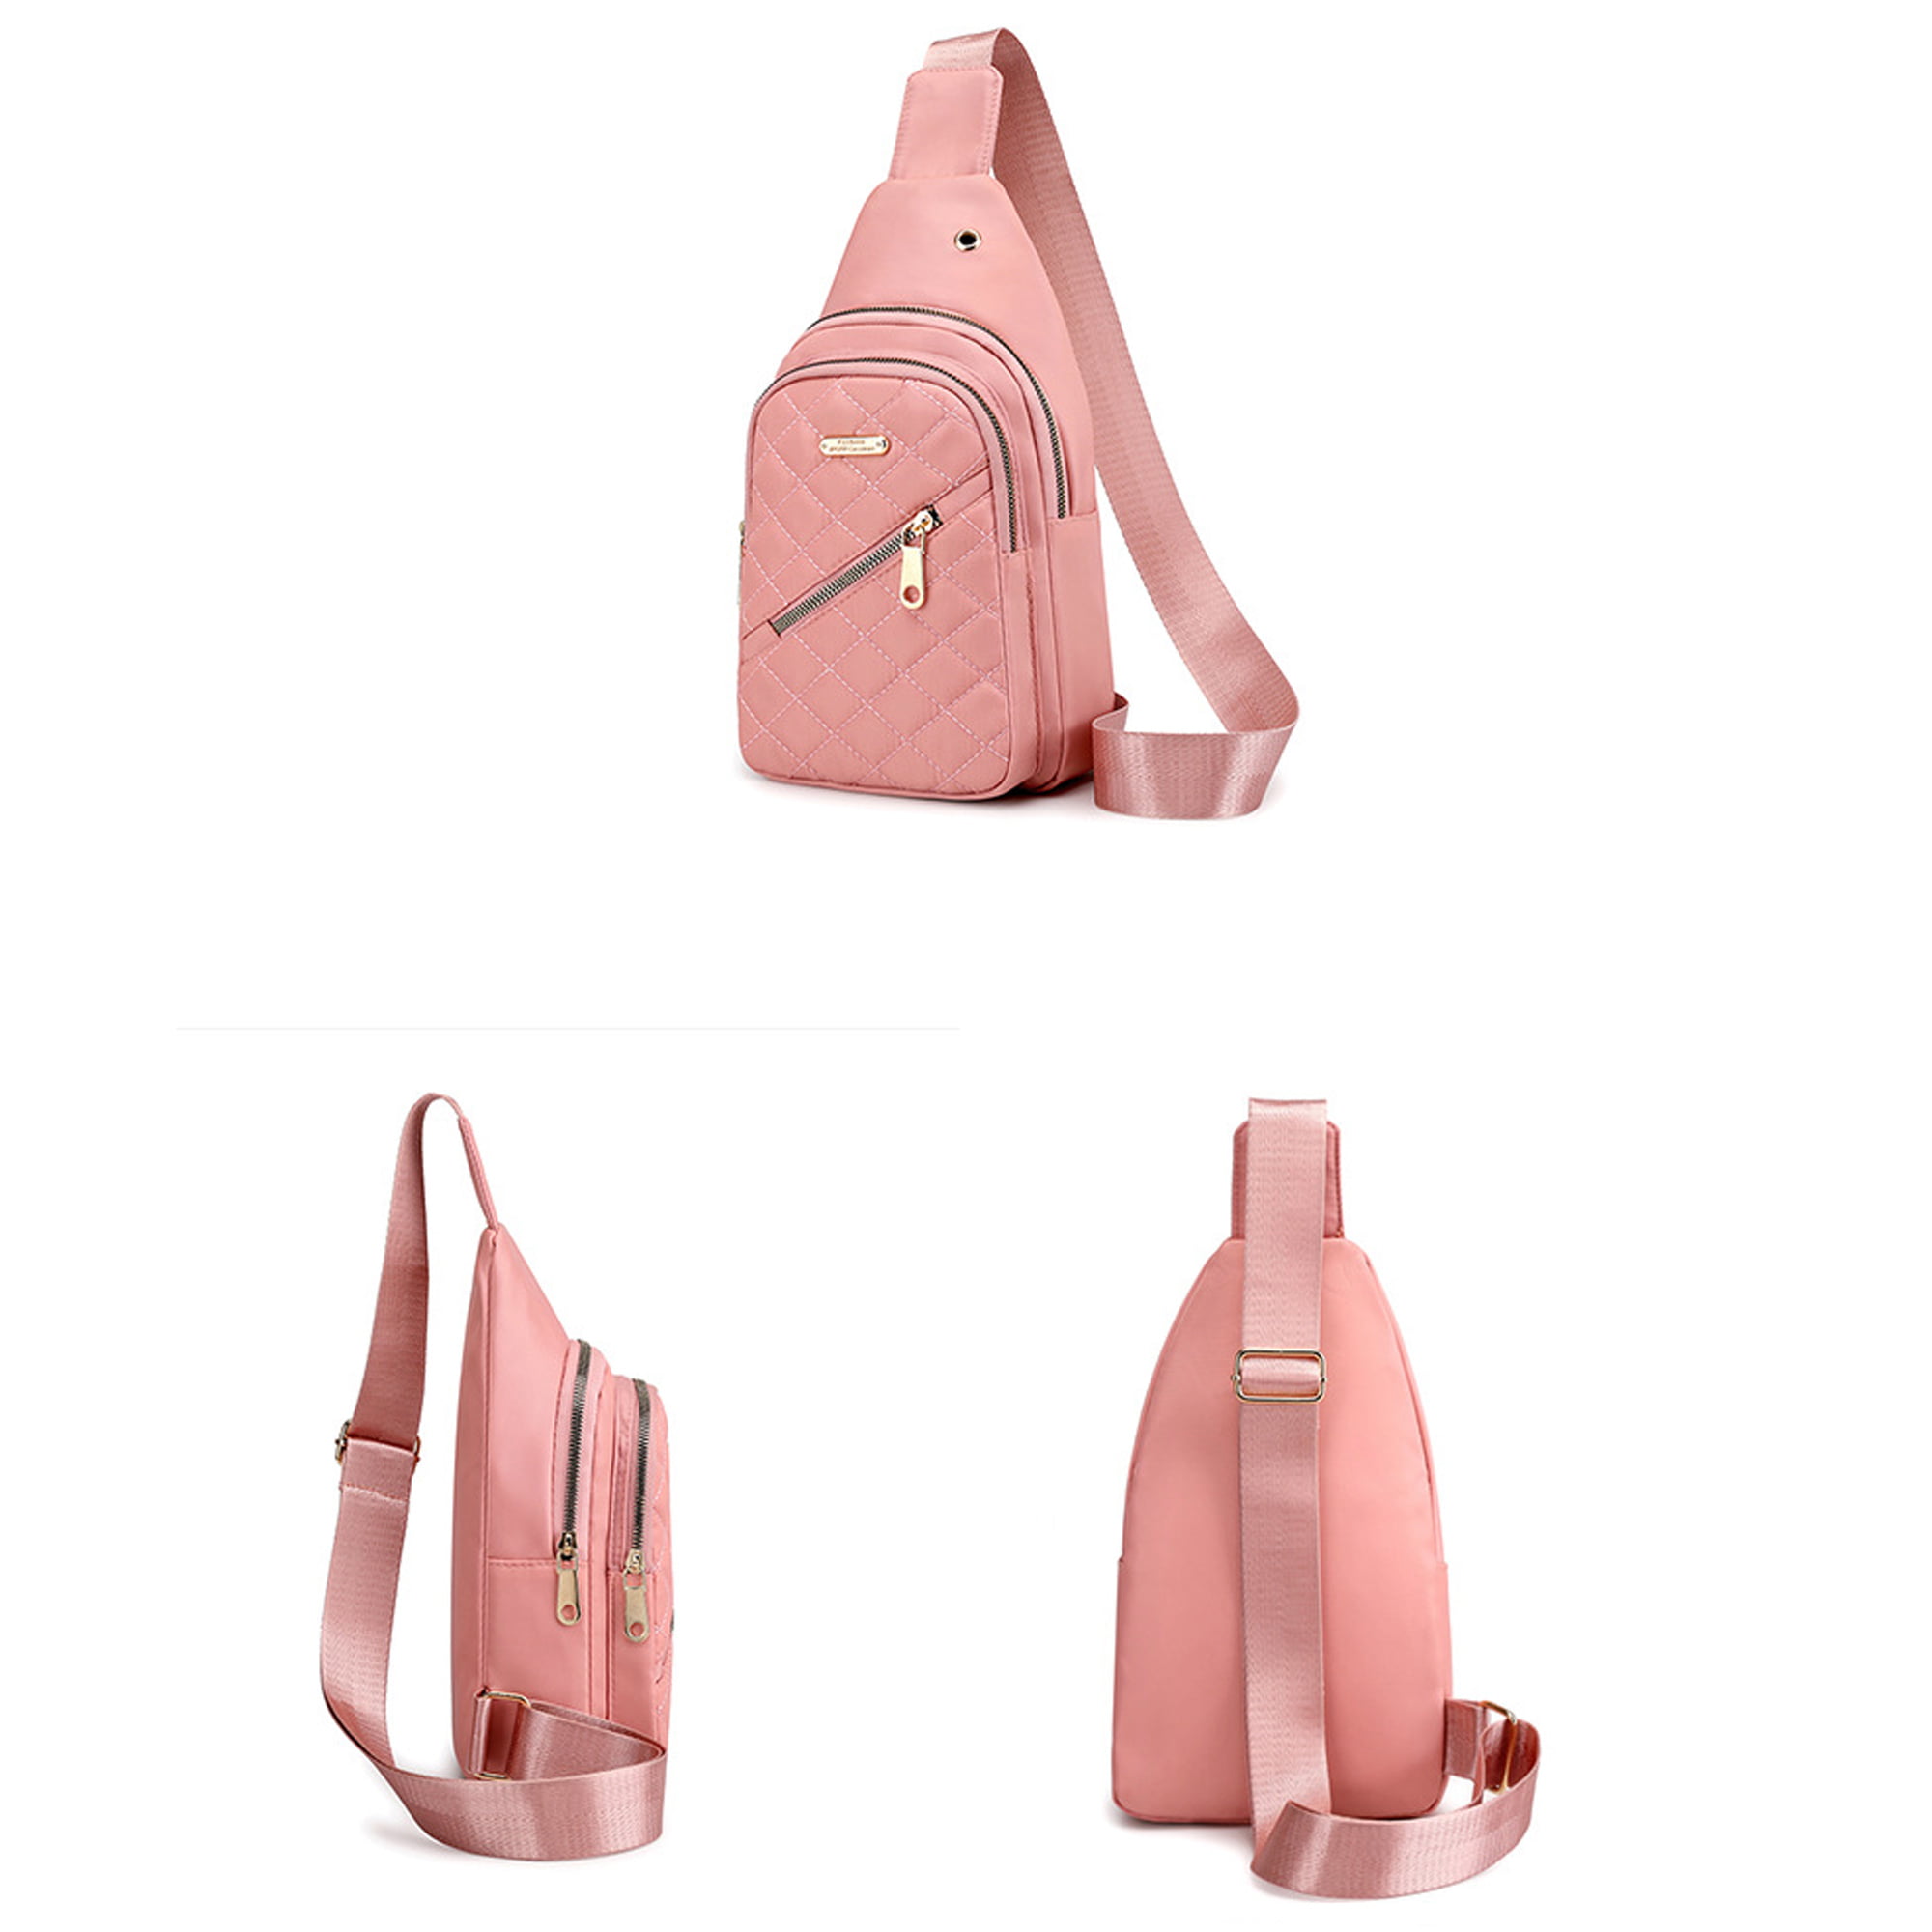 Bags for Women Newly Wax Skin Women Chest Pack Female Sling Bags